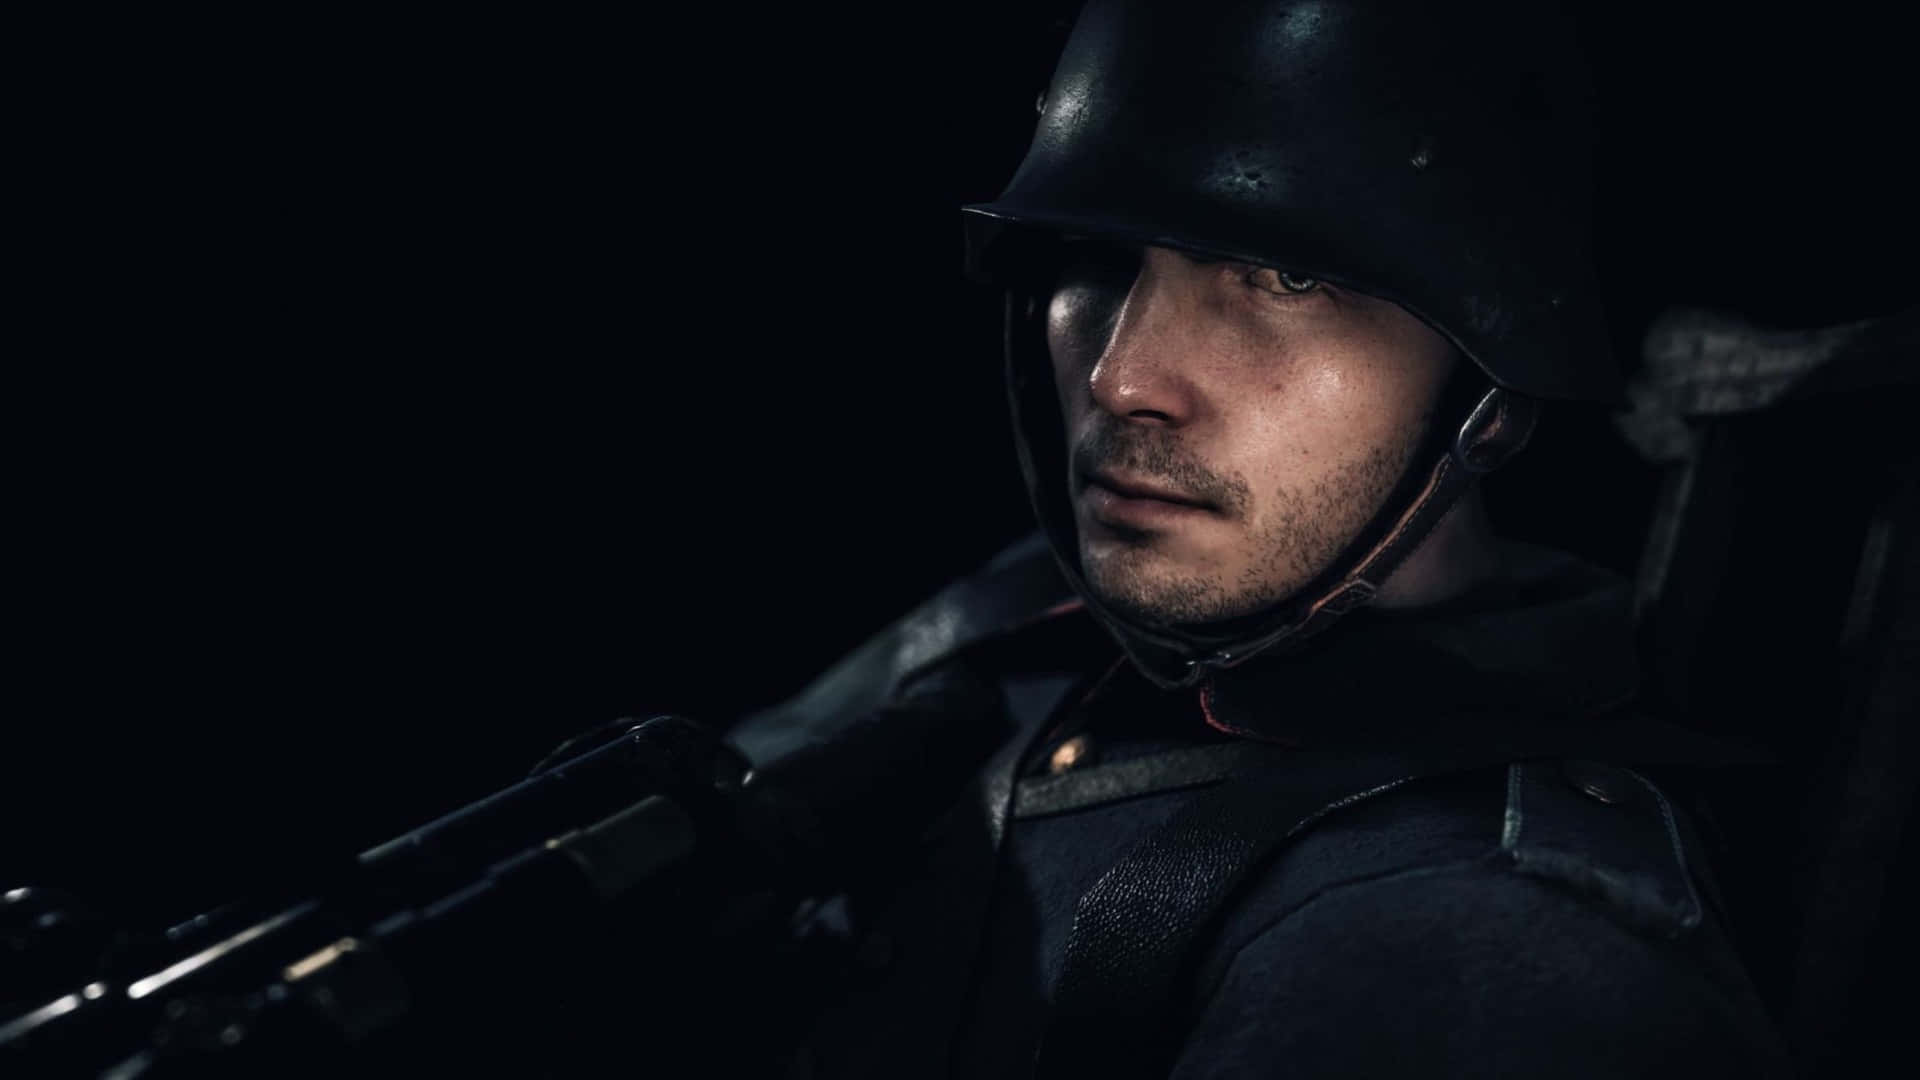 A Soldier In A Helmet Is Holding A Rifle